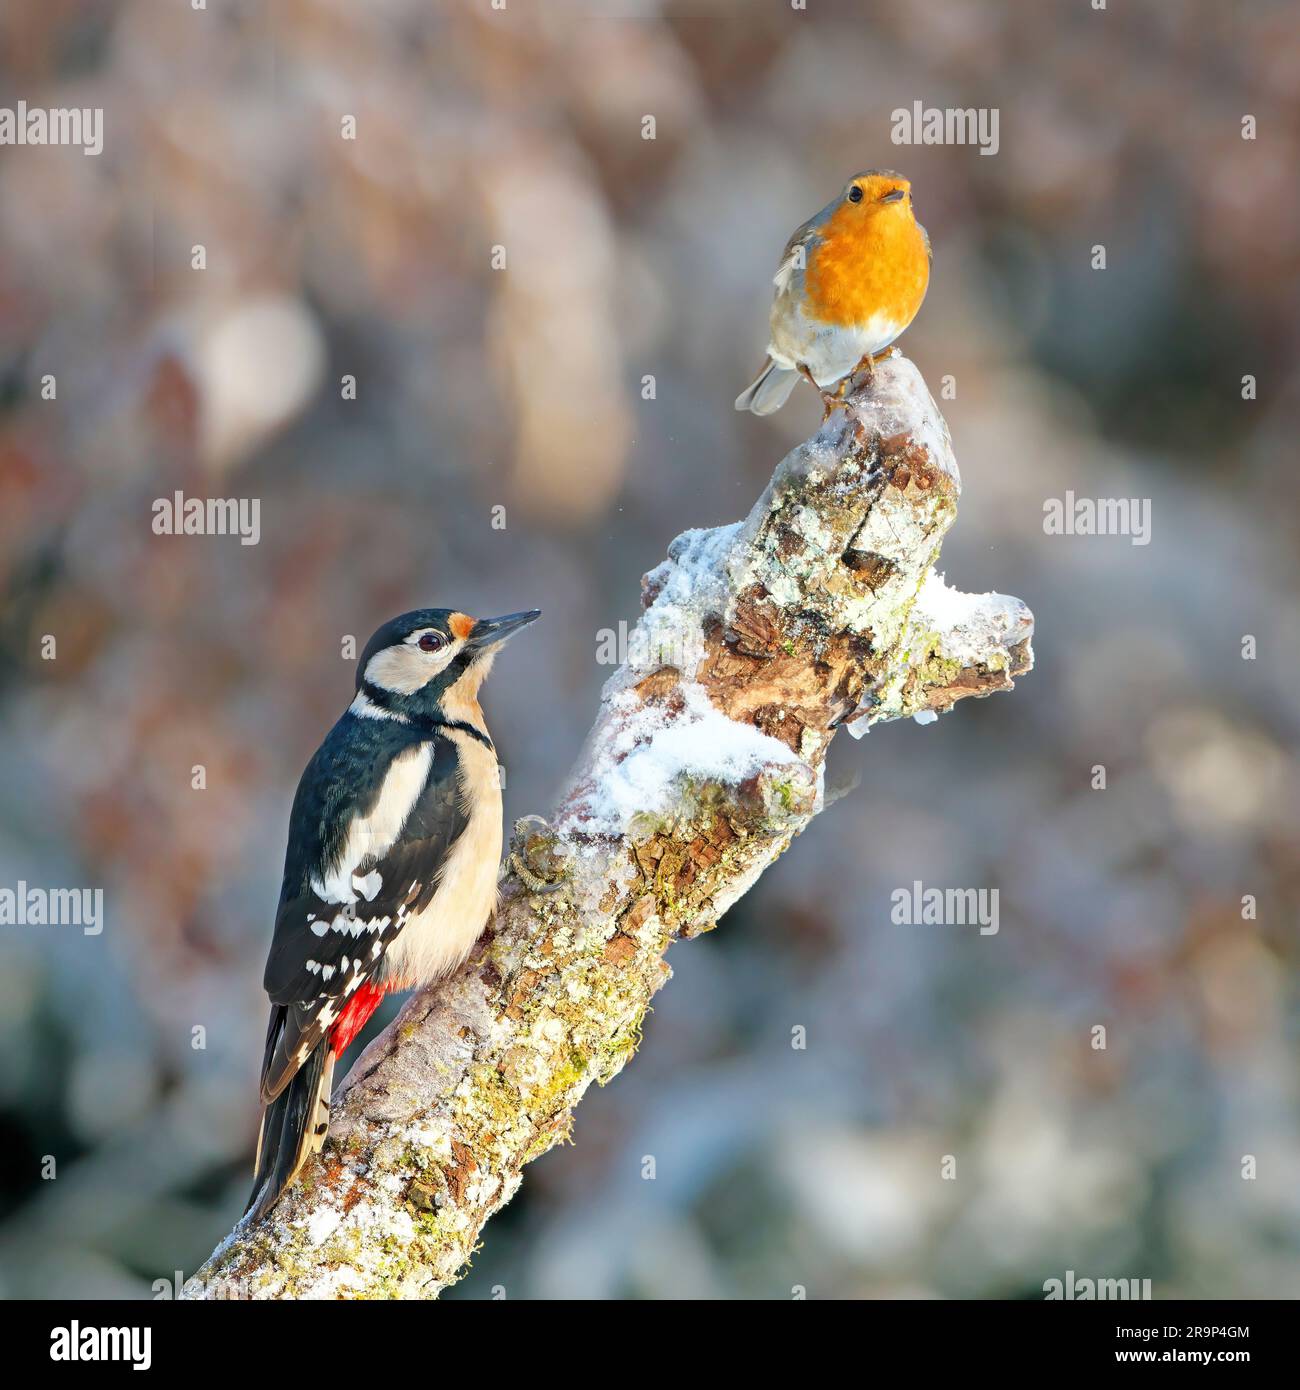 Great Spotted Woodpecker (Picoides major, Dendrocopos major) and European Robin (Erithacus rubecula) perched on a snowy broekn-off branch. Germany Stock Photo